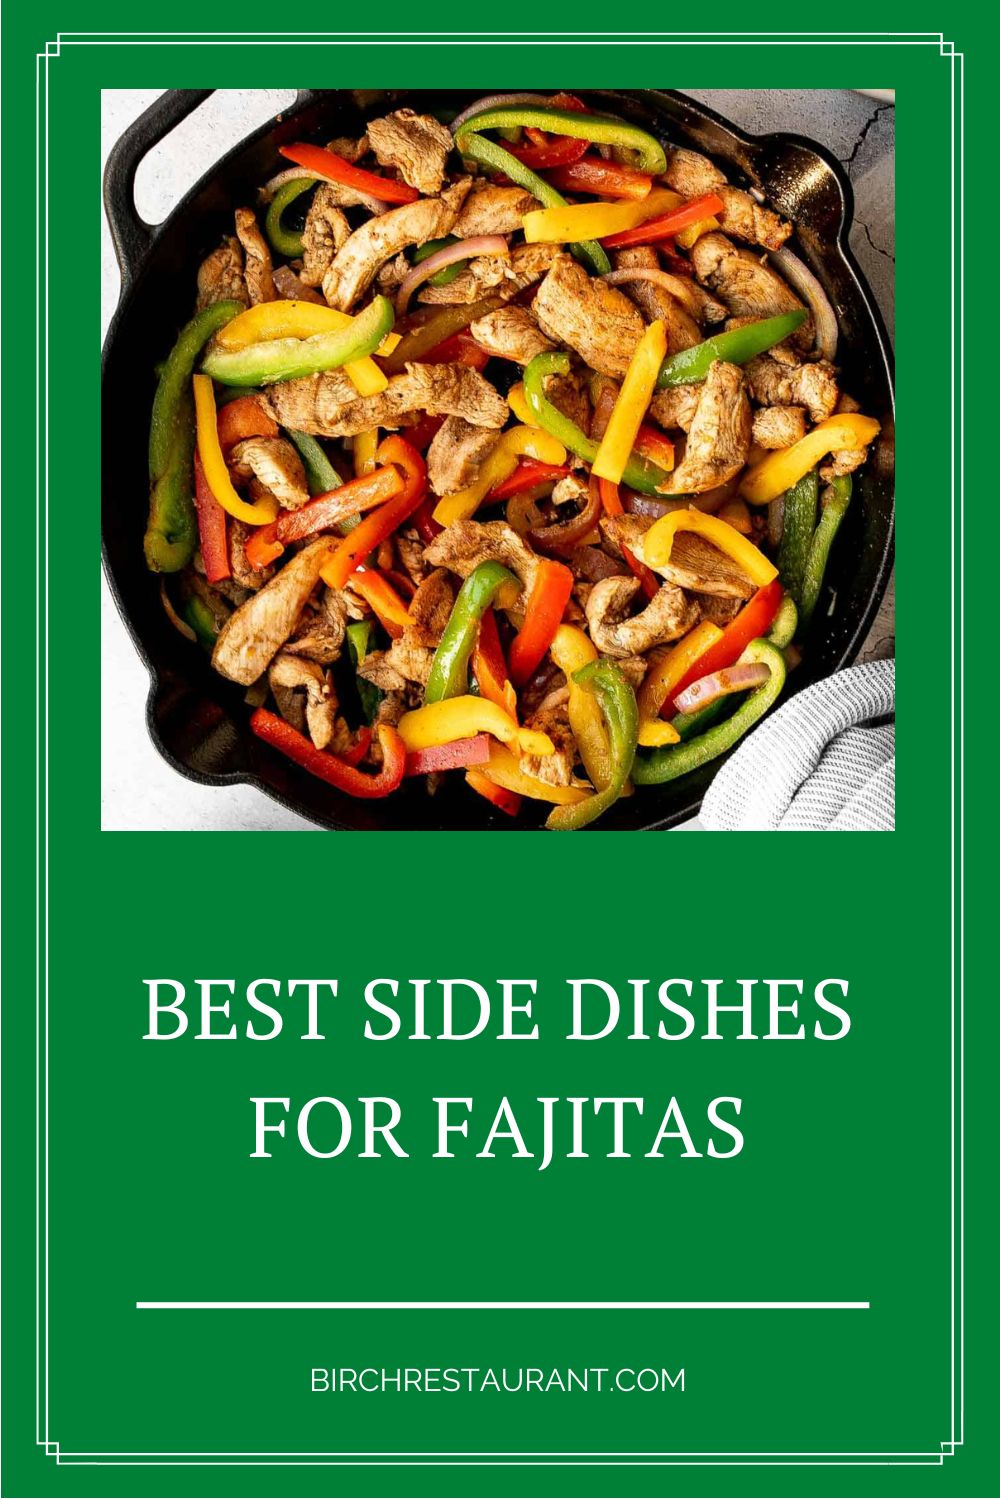 Best Side Dishes for Fajitas